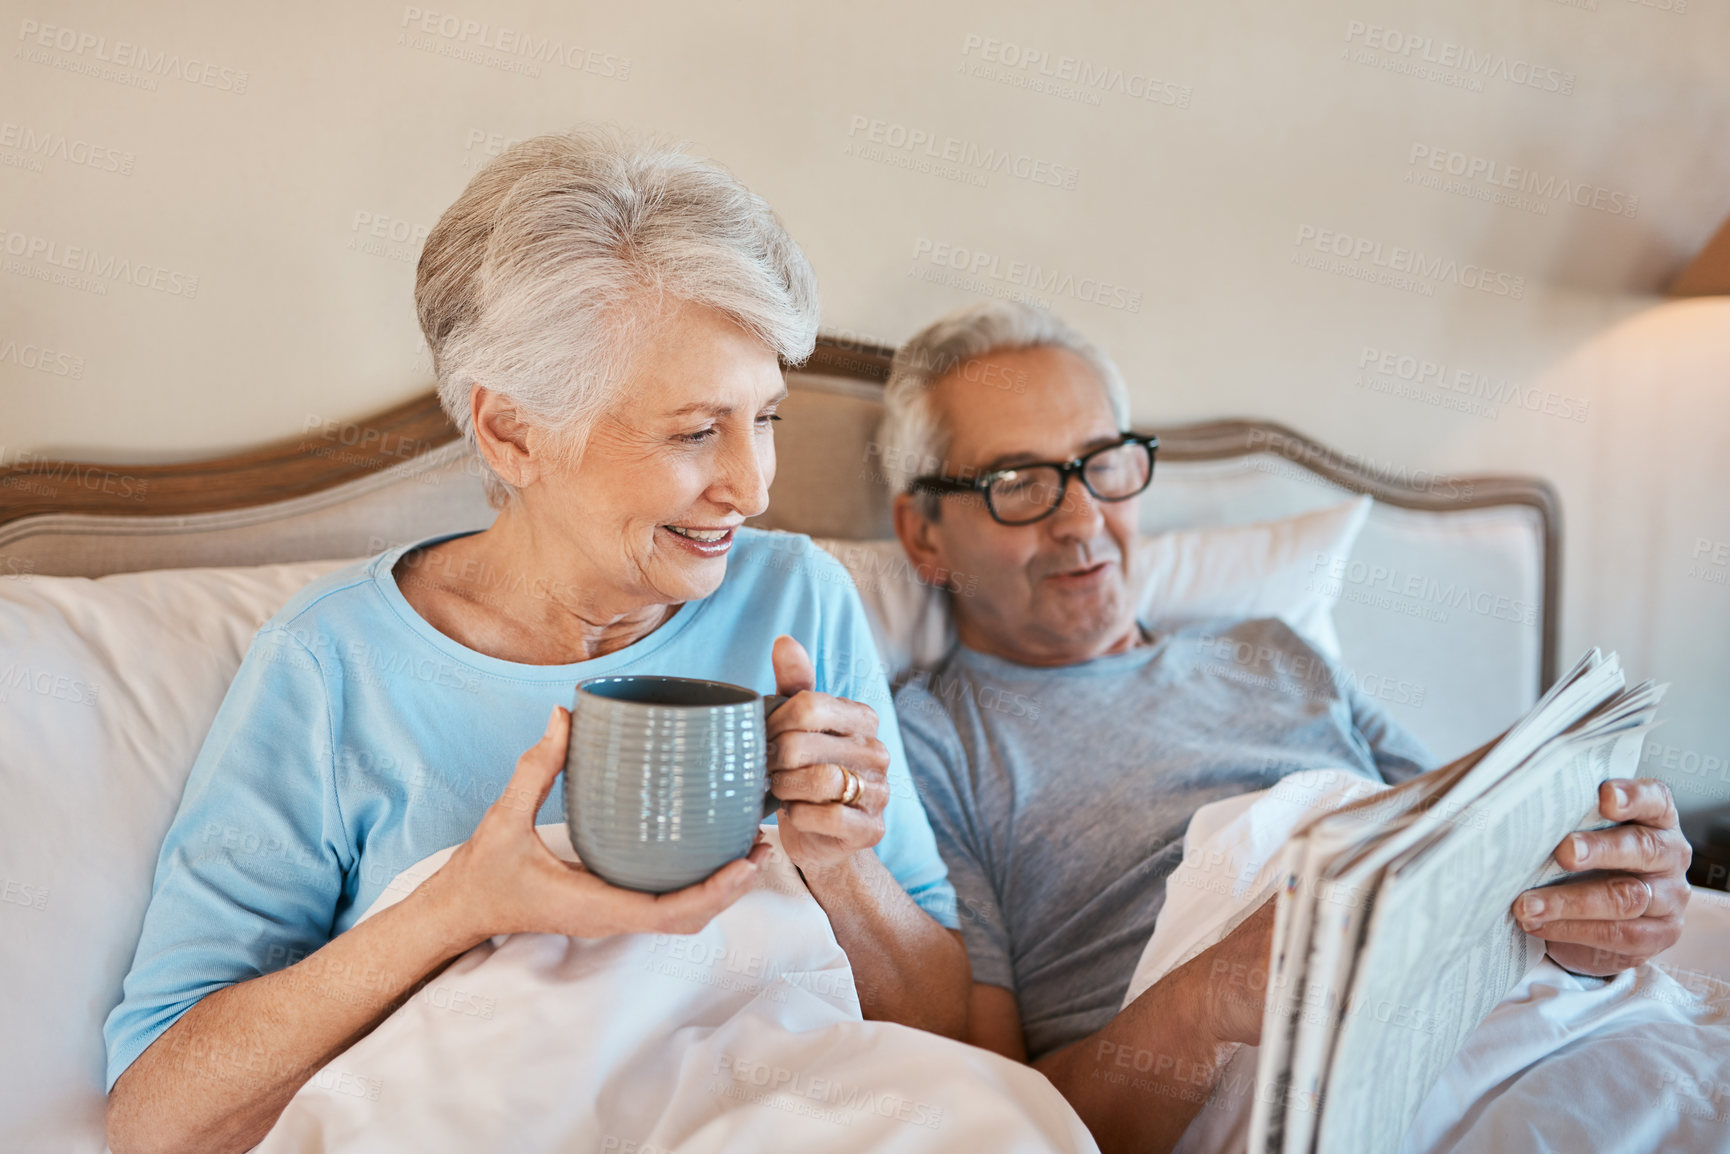 Buy stock photo Cropped shot of a senior man reading a newspaper in bed while his wife drinks a cup of coffee